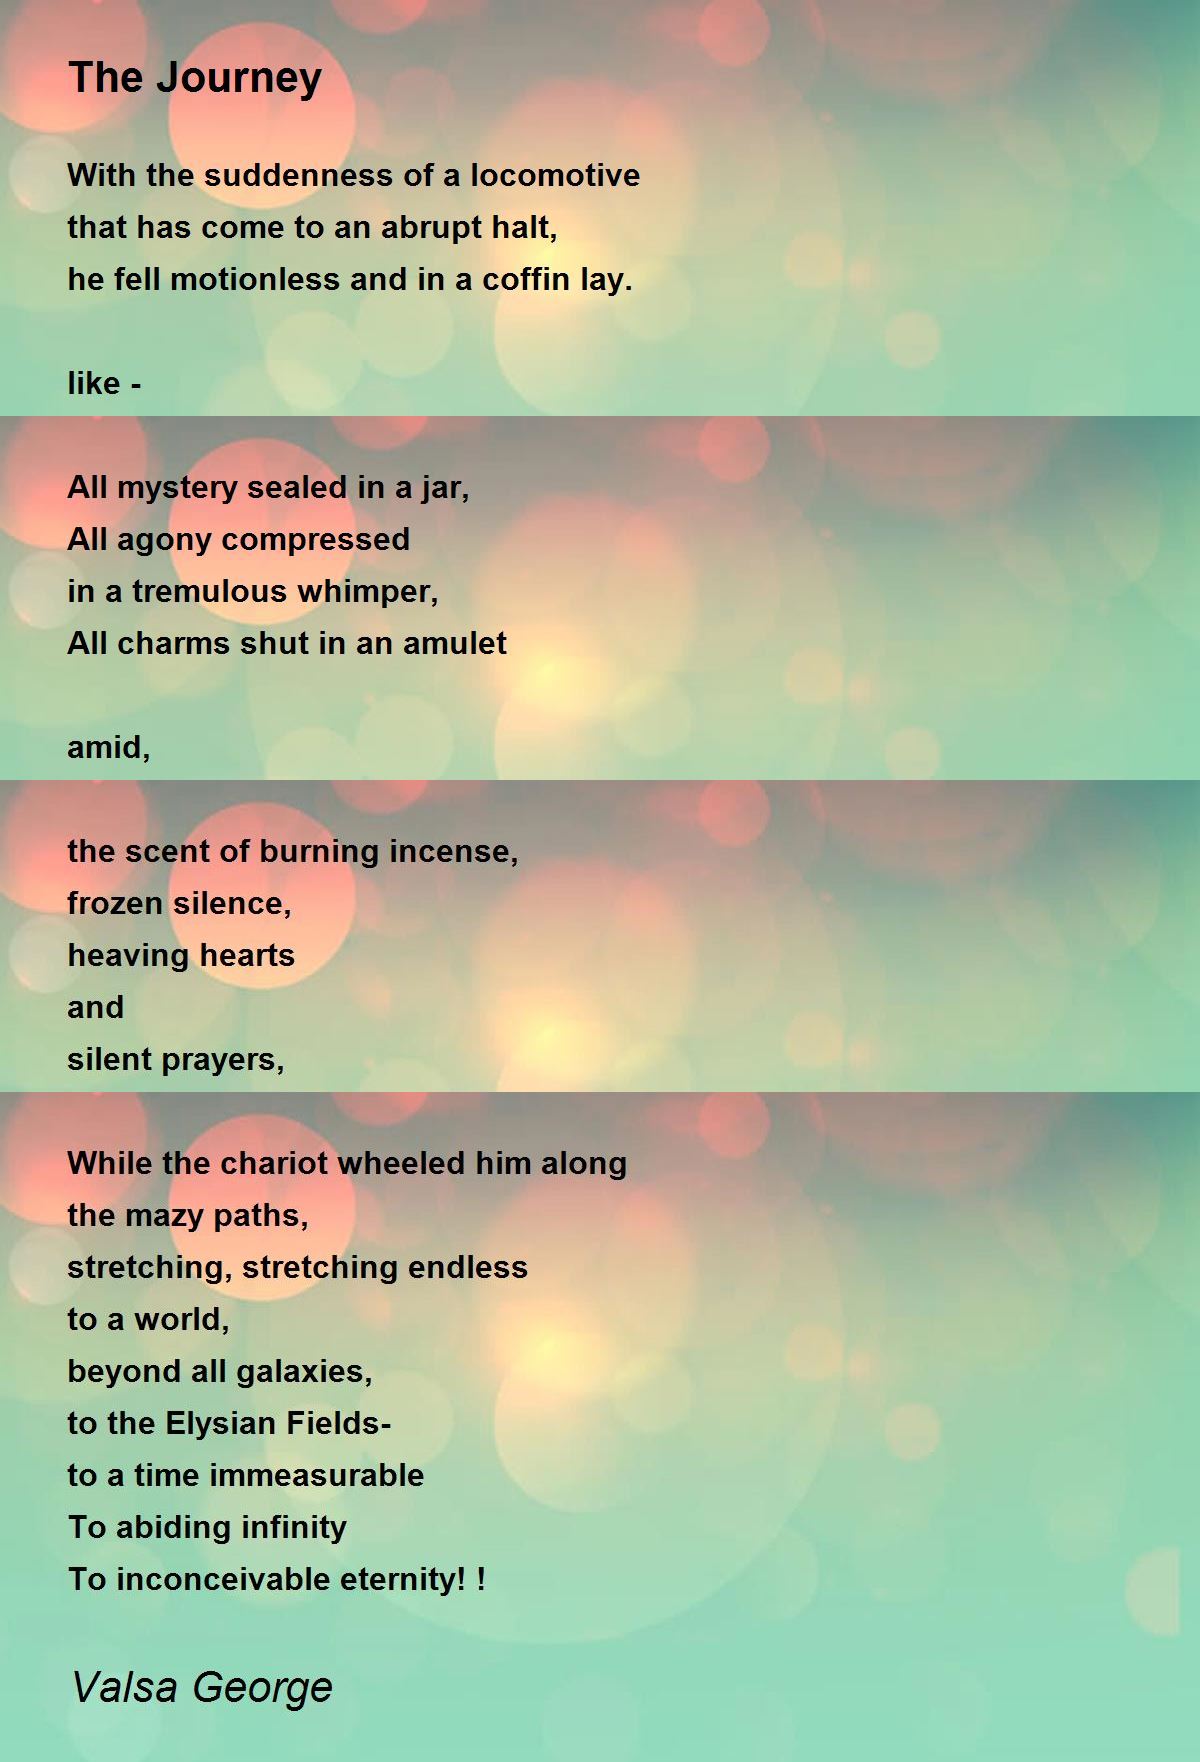 the journey poem answers